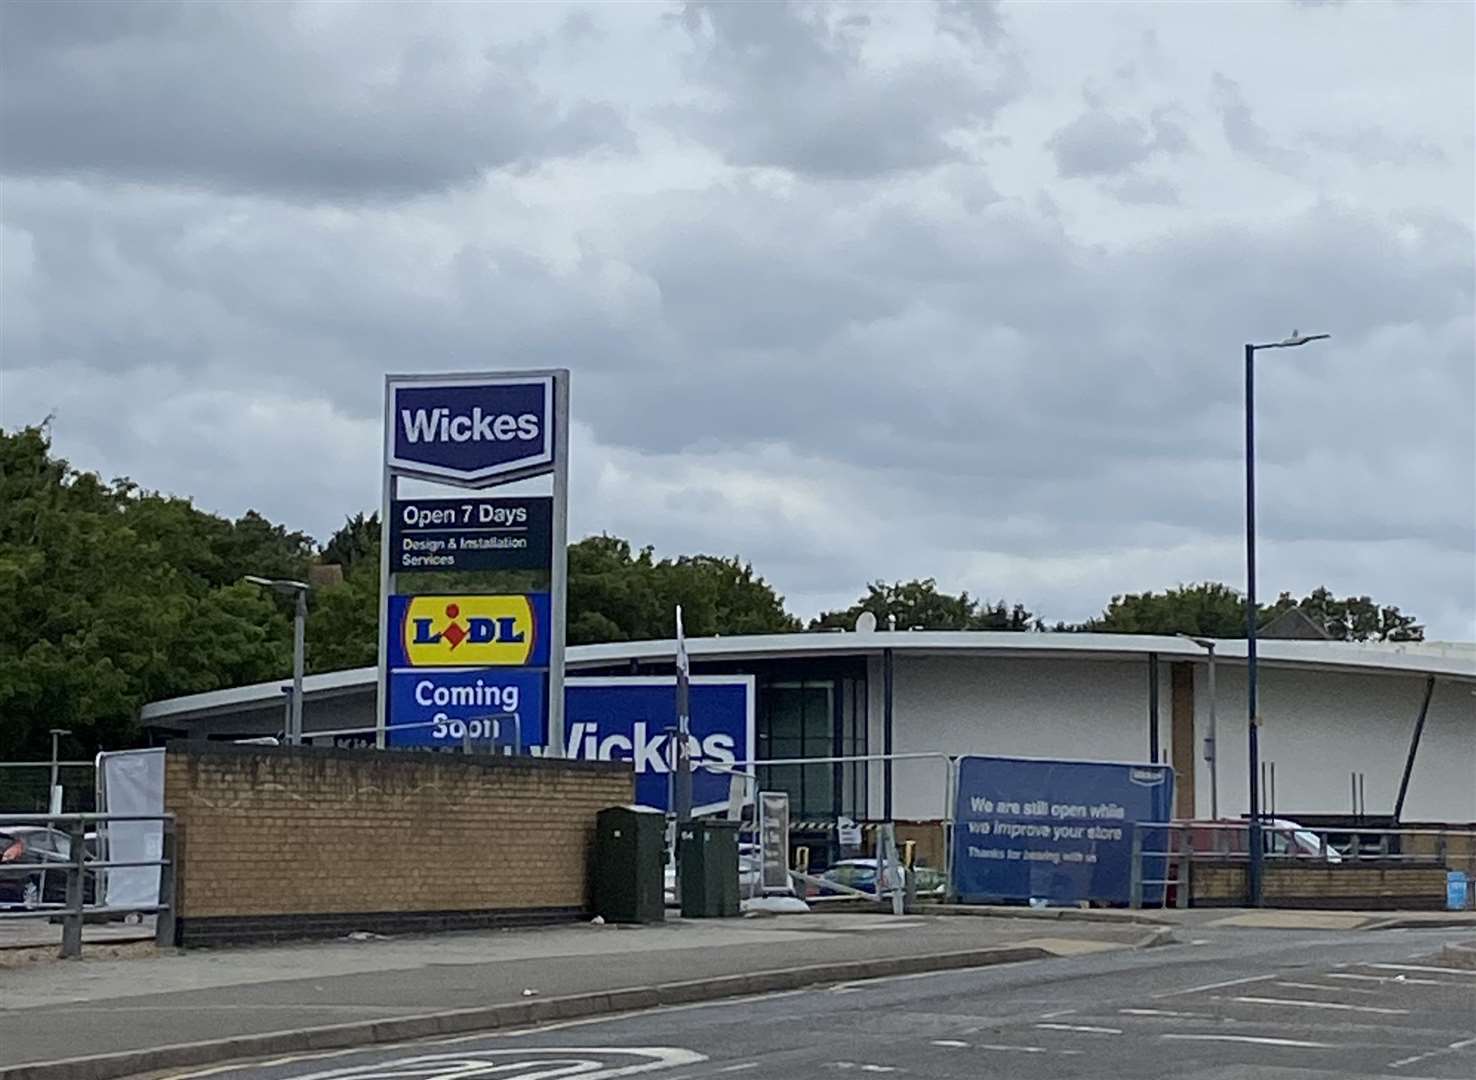 Lidl's new store in St Peter's Street, Maidstone, will be opening this Thursday